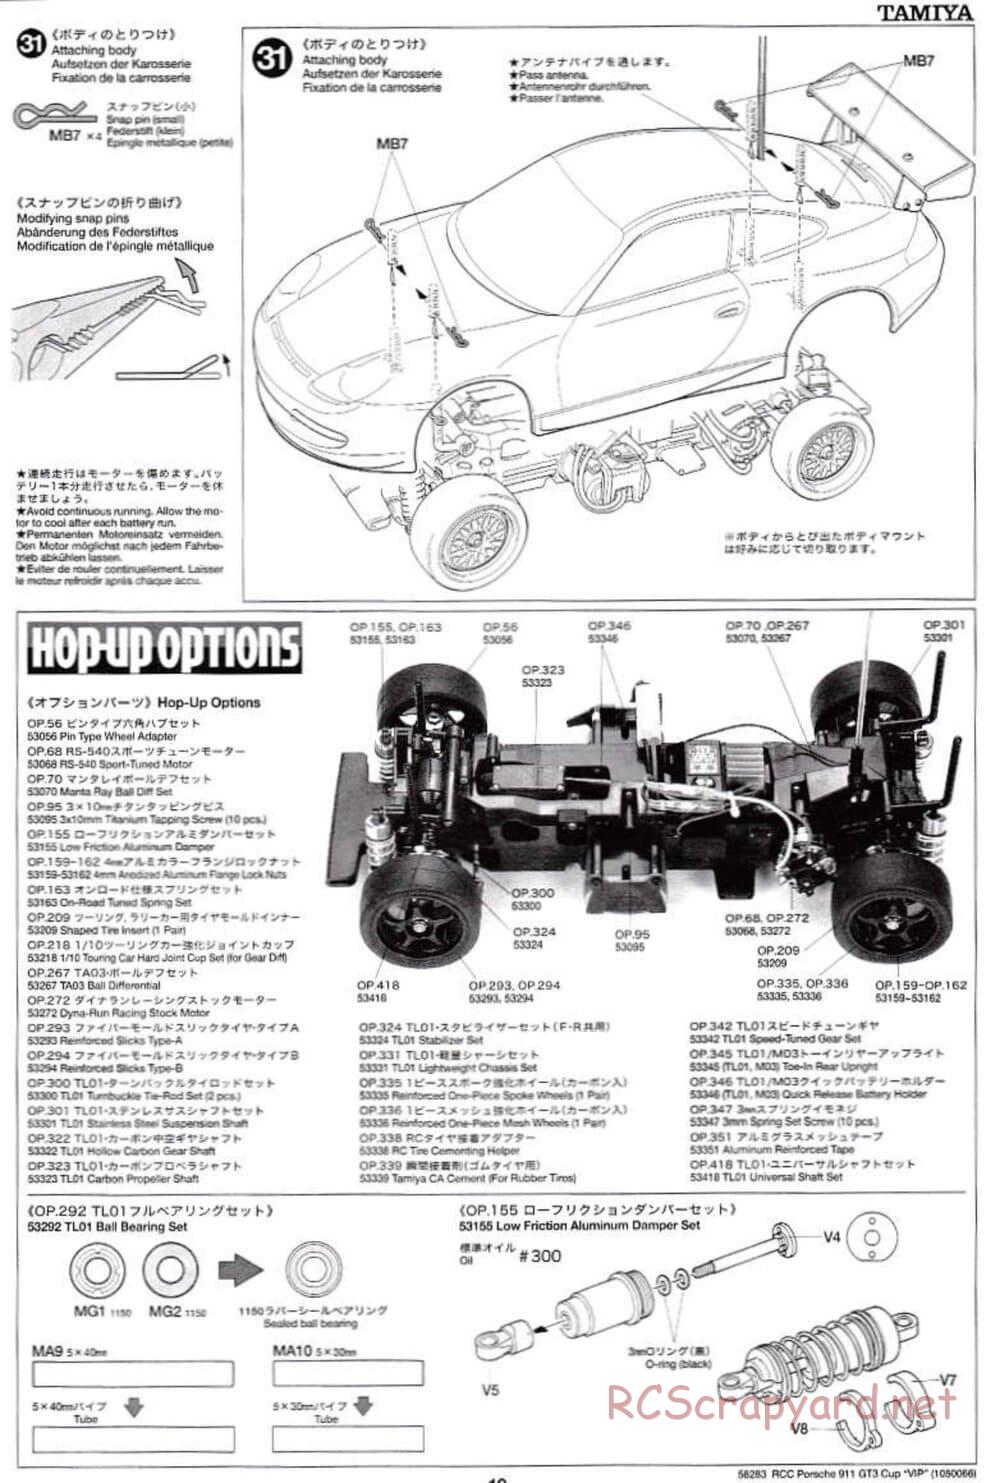 Tamiya - Porsche 911 GT3 Cup VIP - TL-01 Chassis - Manual - Page 19